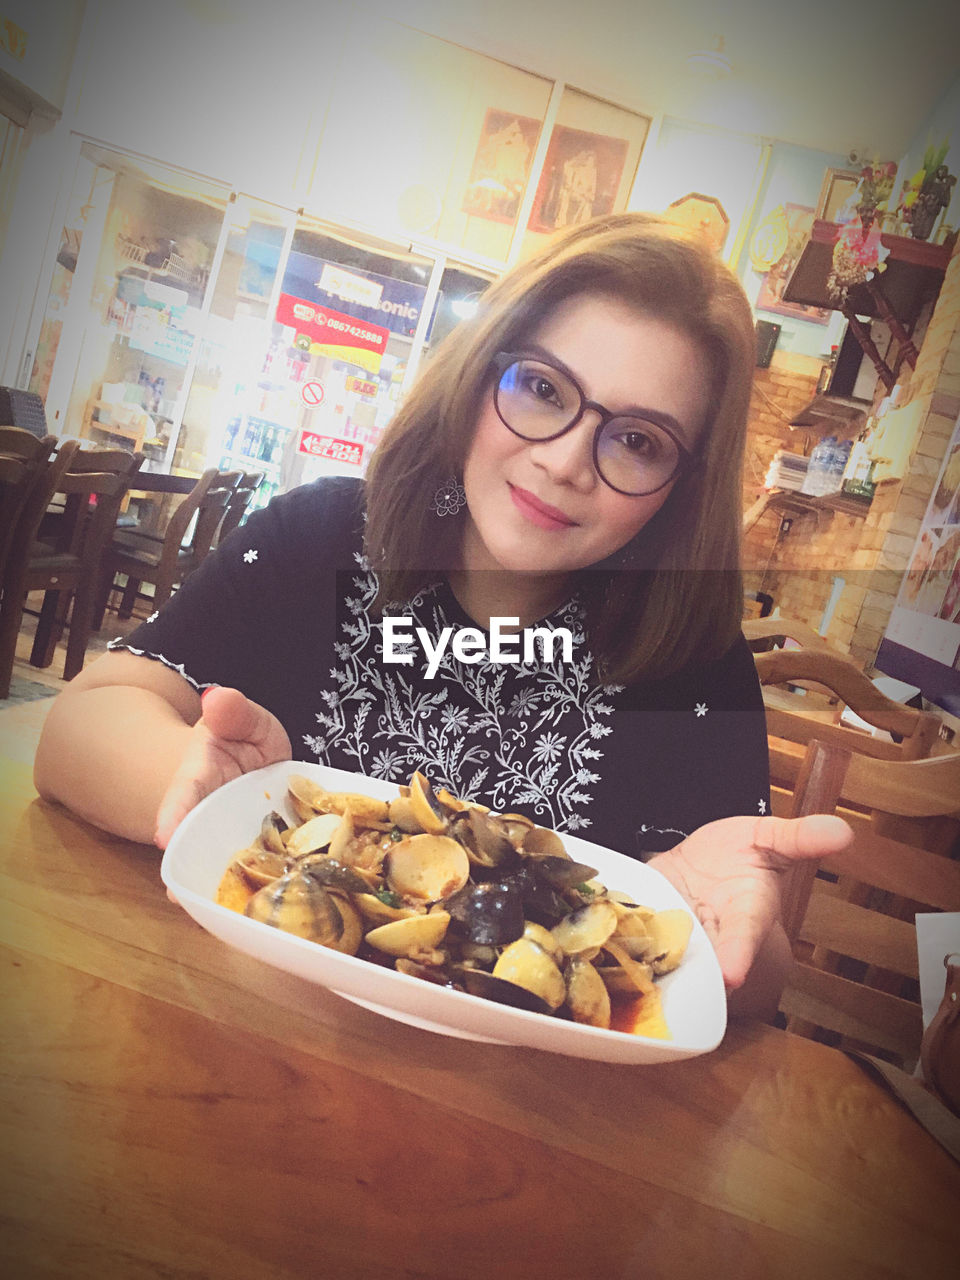 PORTRAIT OF A SMILING YOUNG WOMAN WITH FOOD